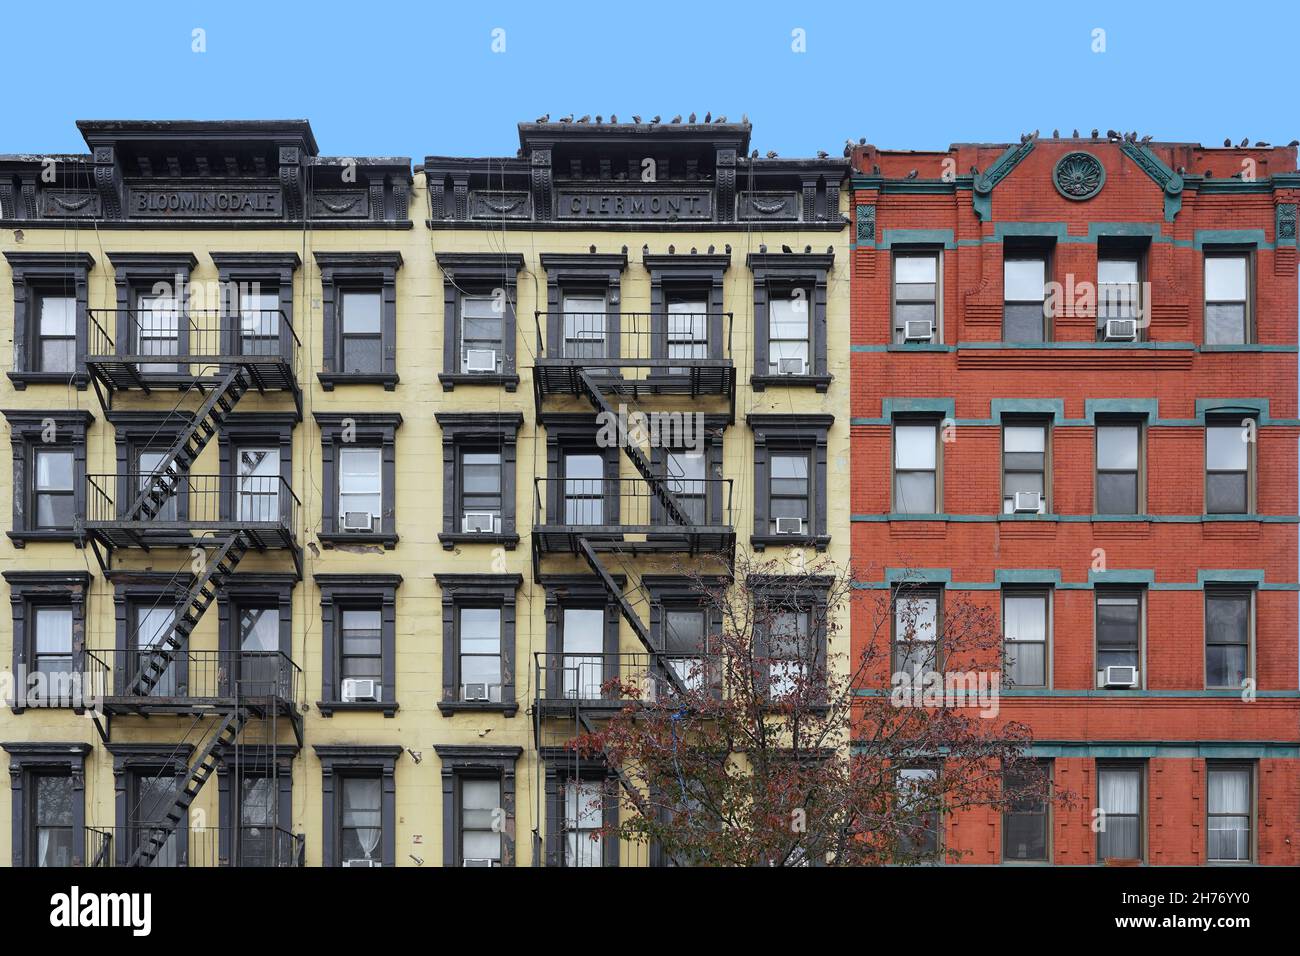 Old fashioned Manhattan apartment building facades with external fire escape ladders Stock Photo